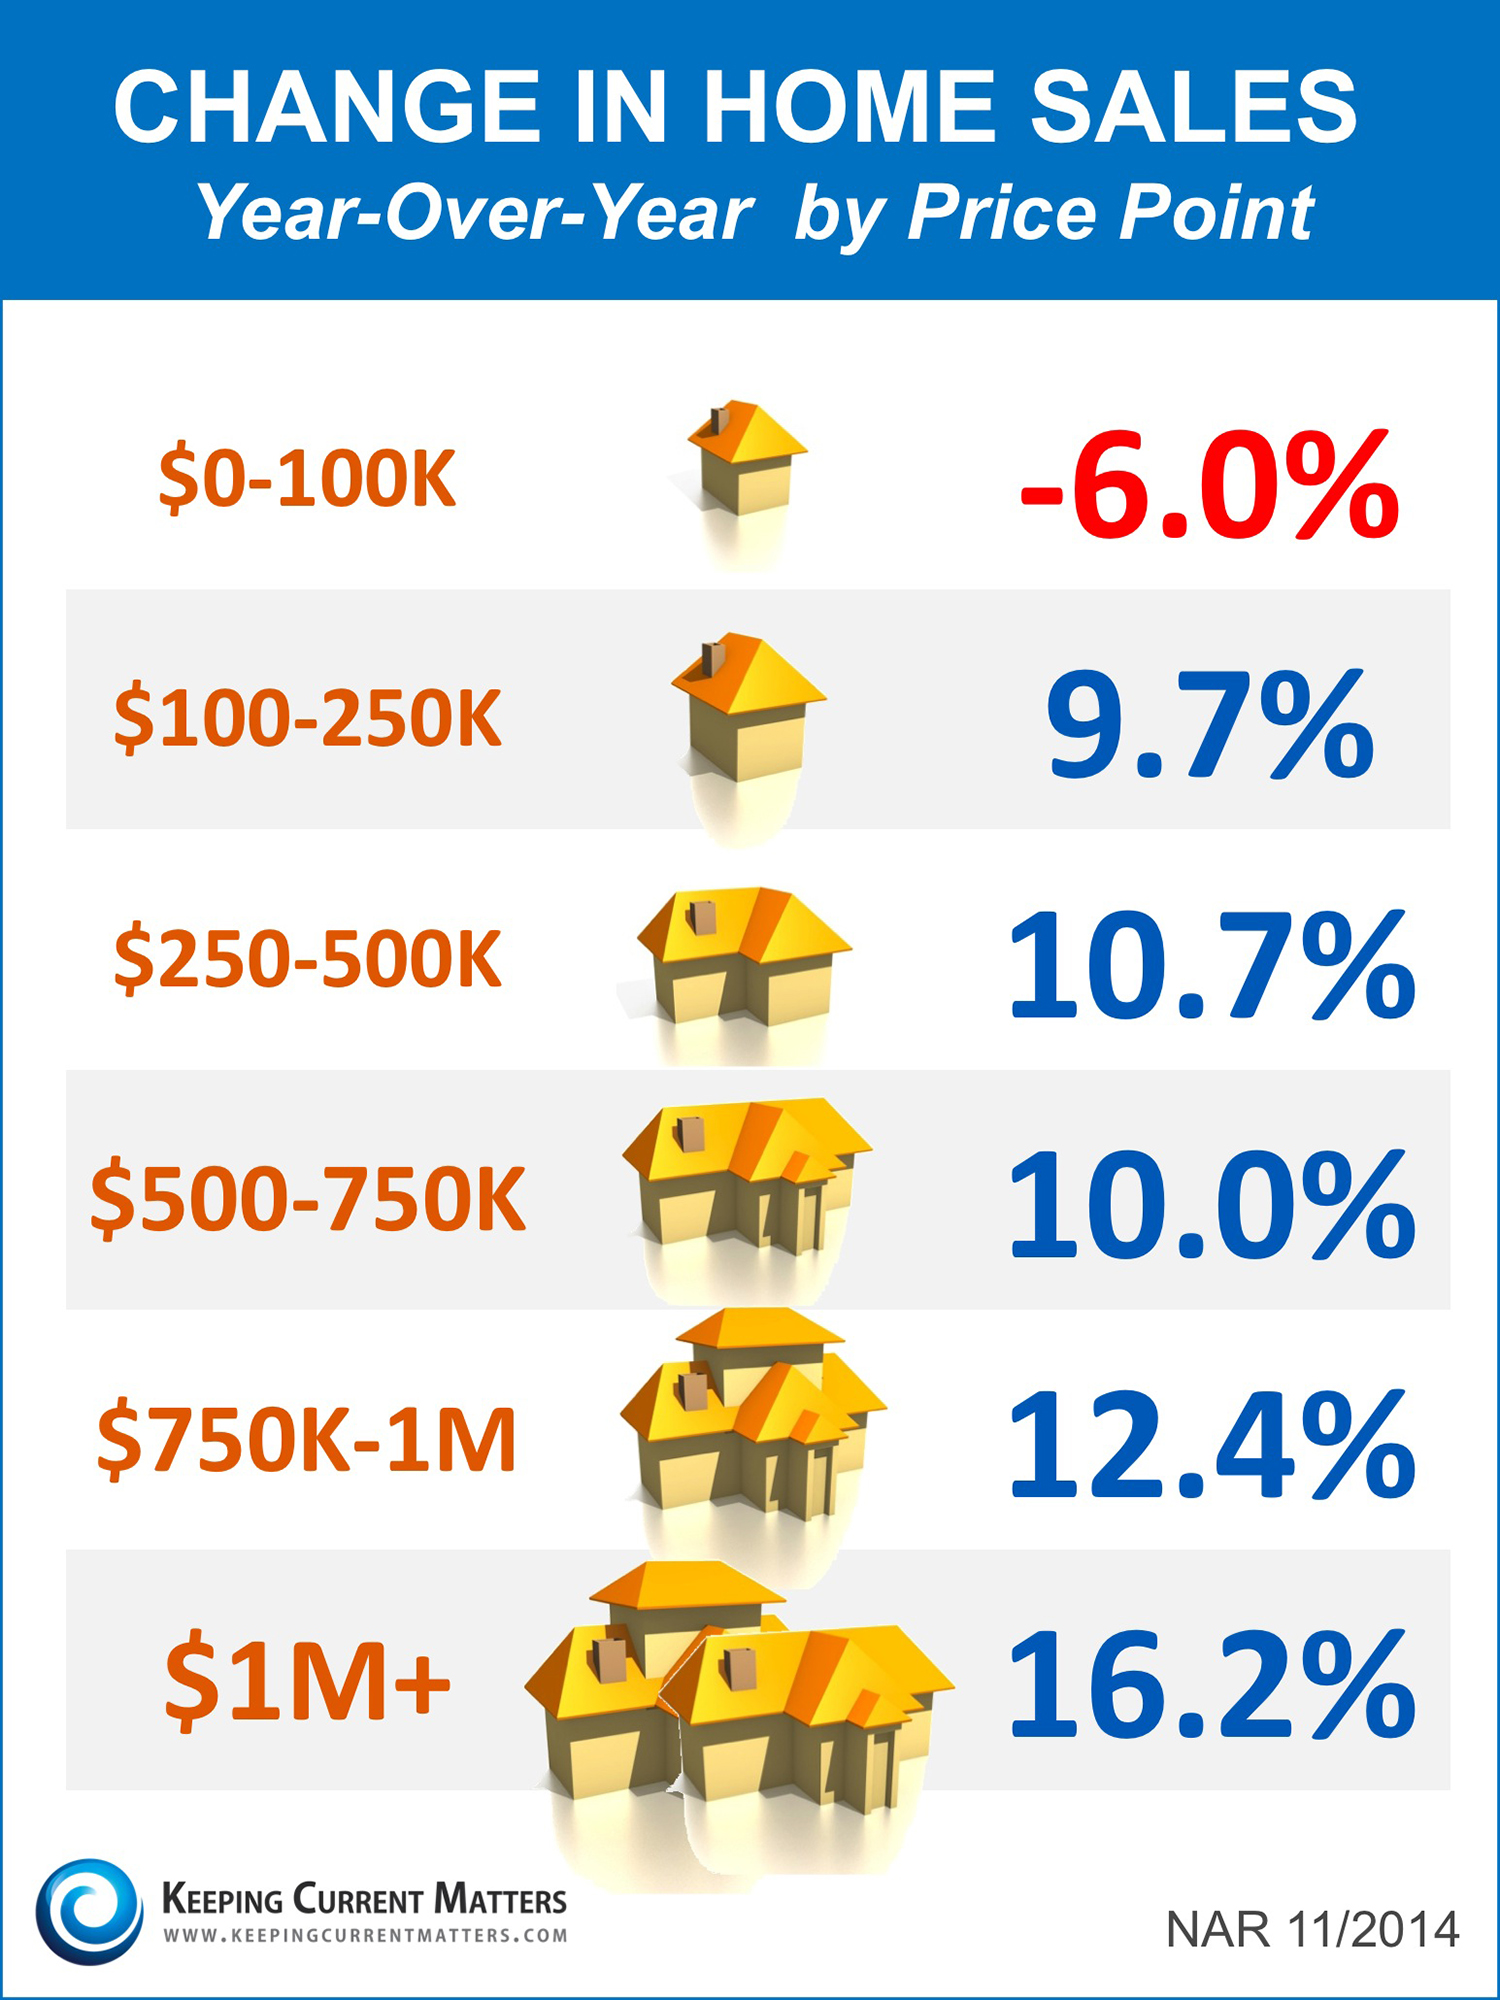 Year-over-Year Price Changes by Range [INFOGRAPHIC] | Keeping Current Matters